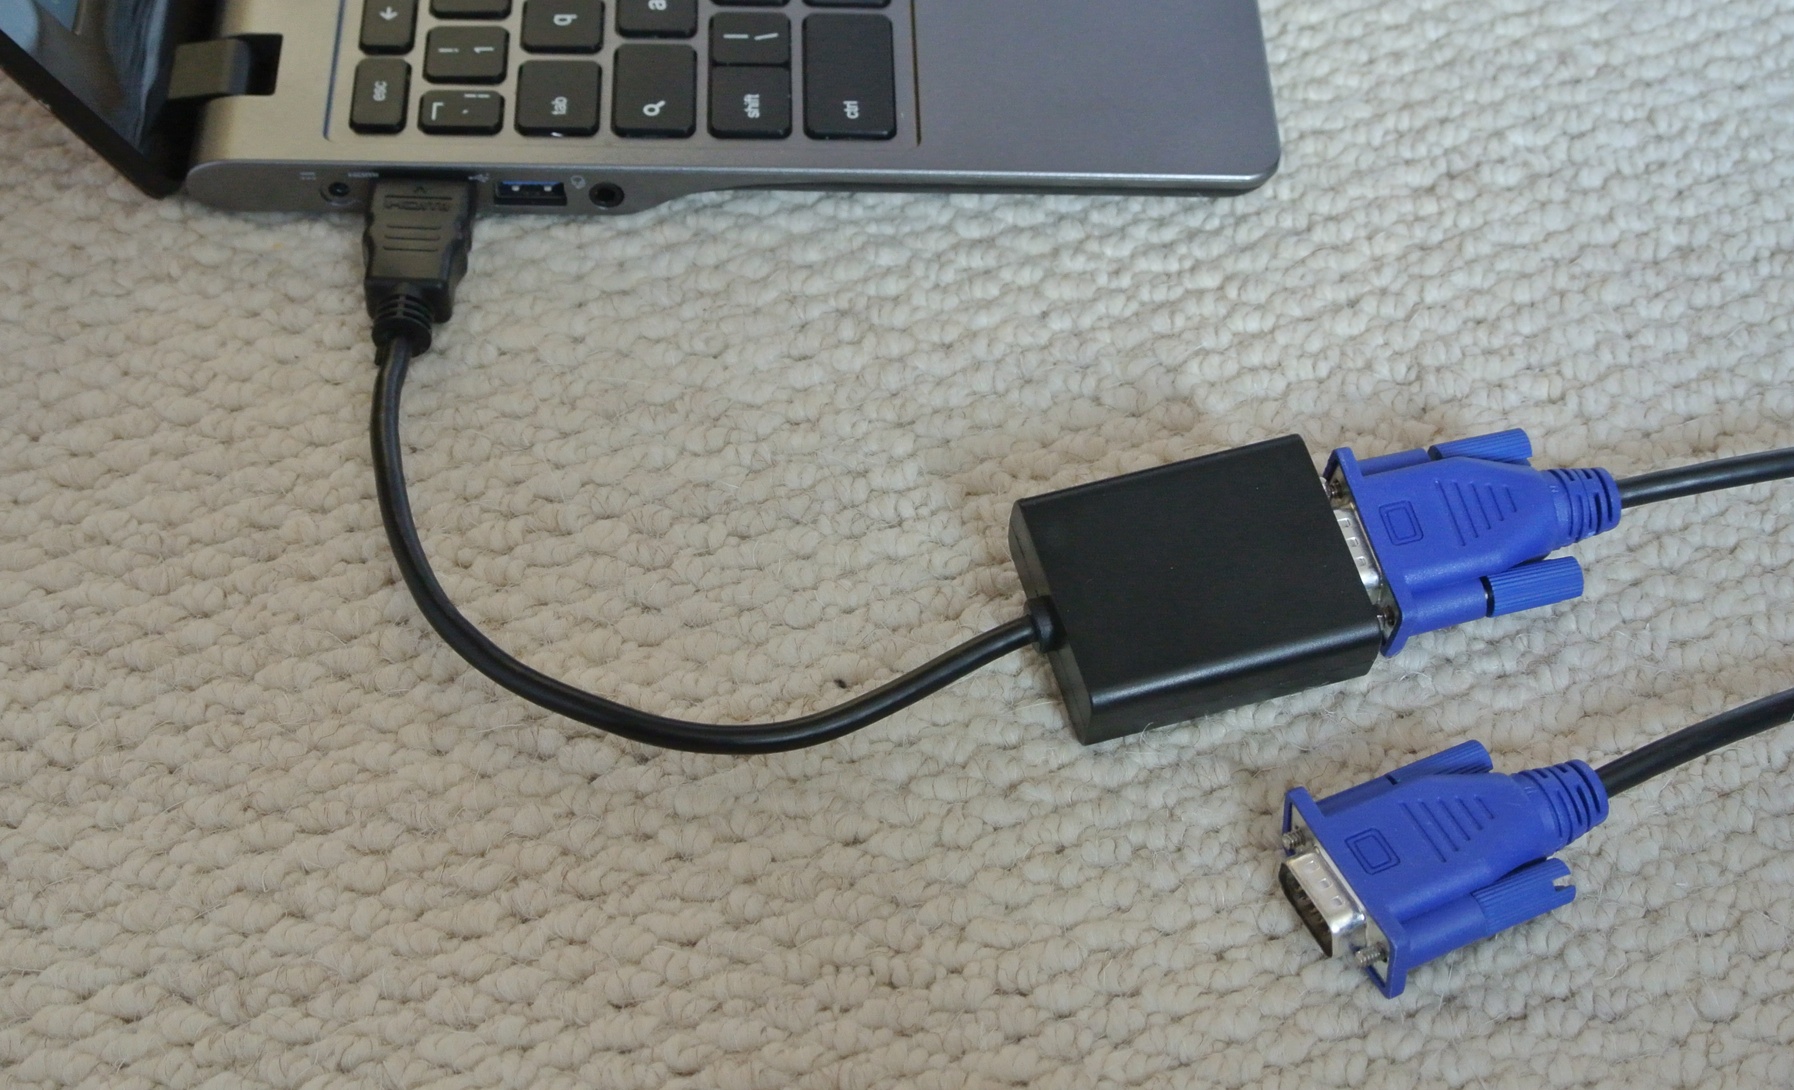 how to connect hdmi to hp laptop to projector